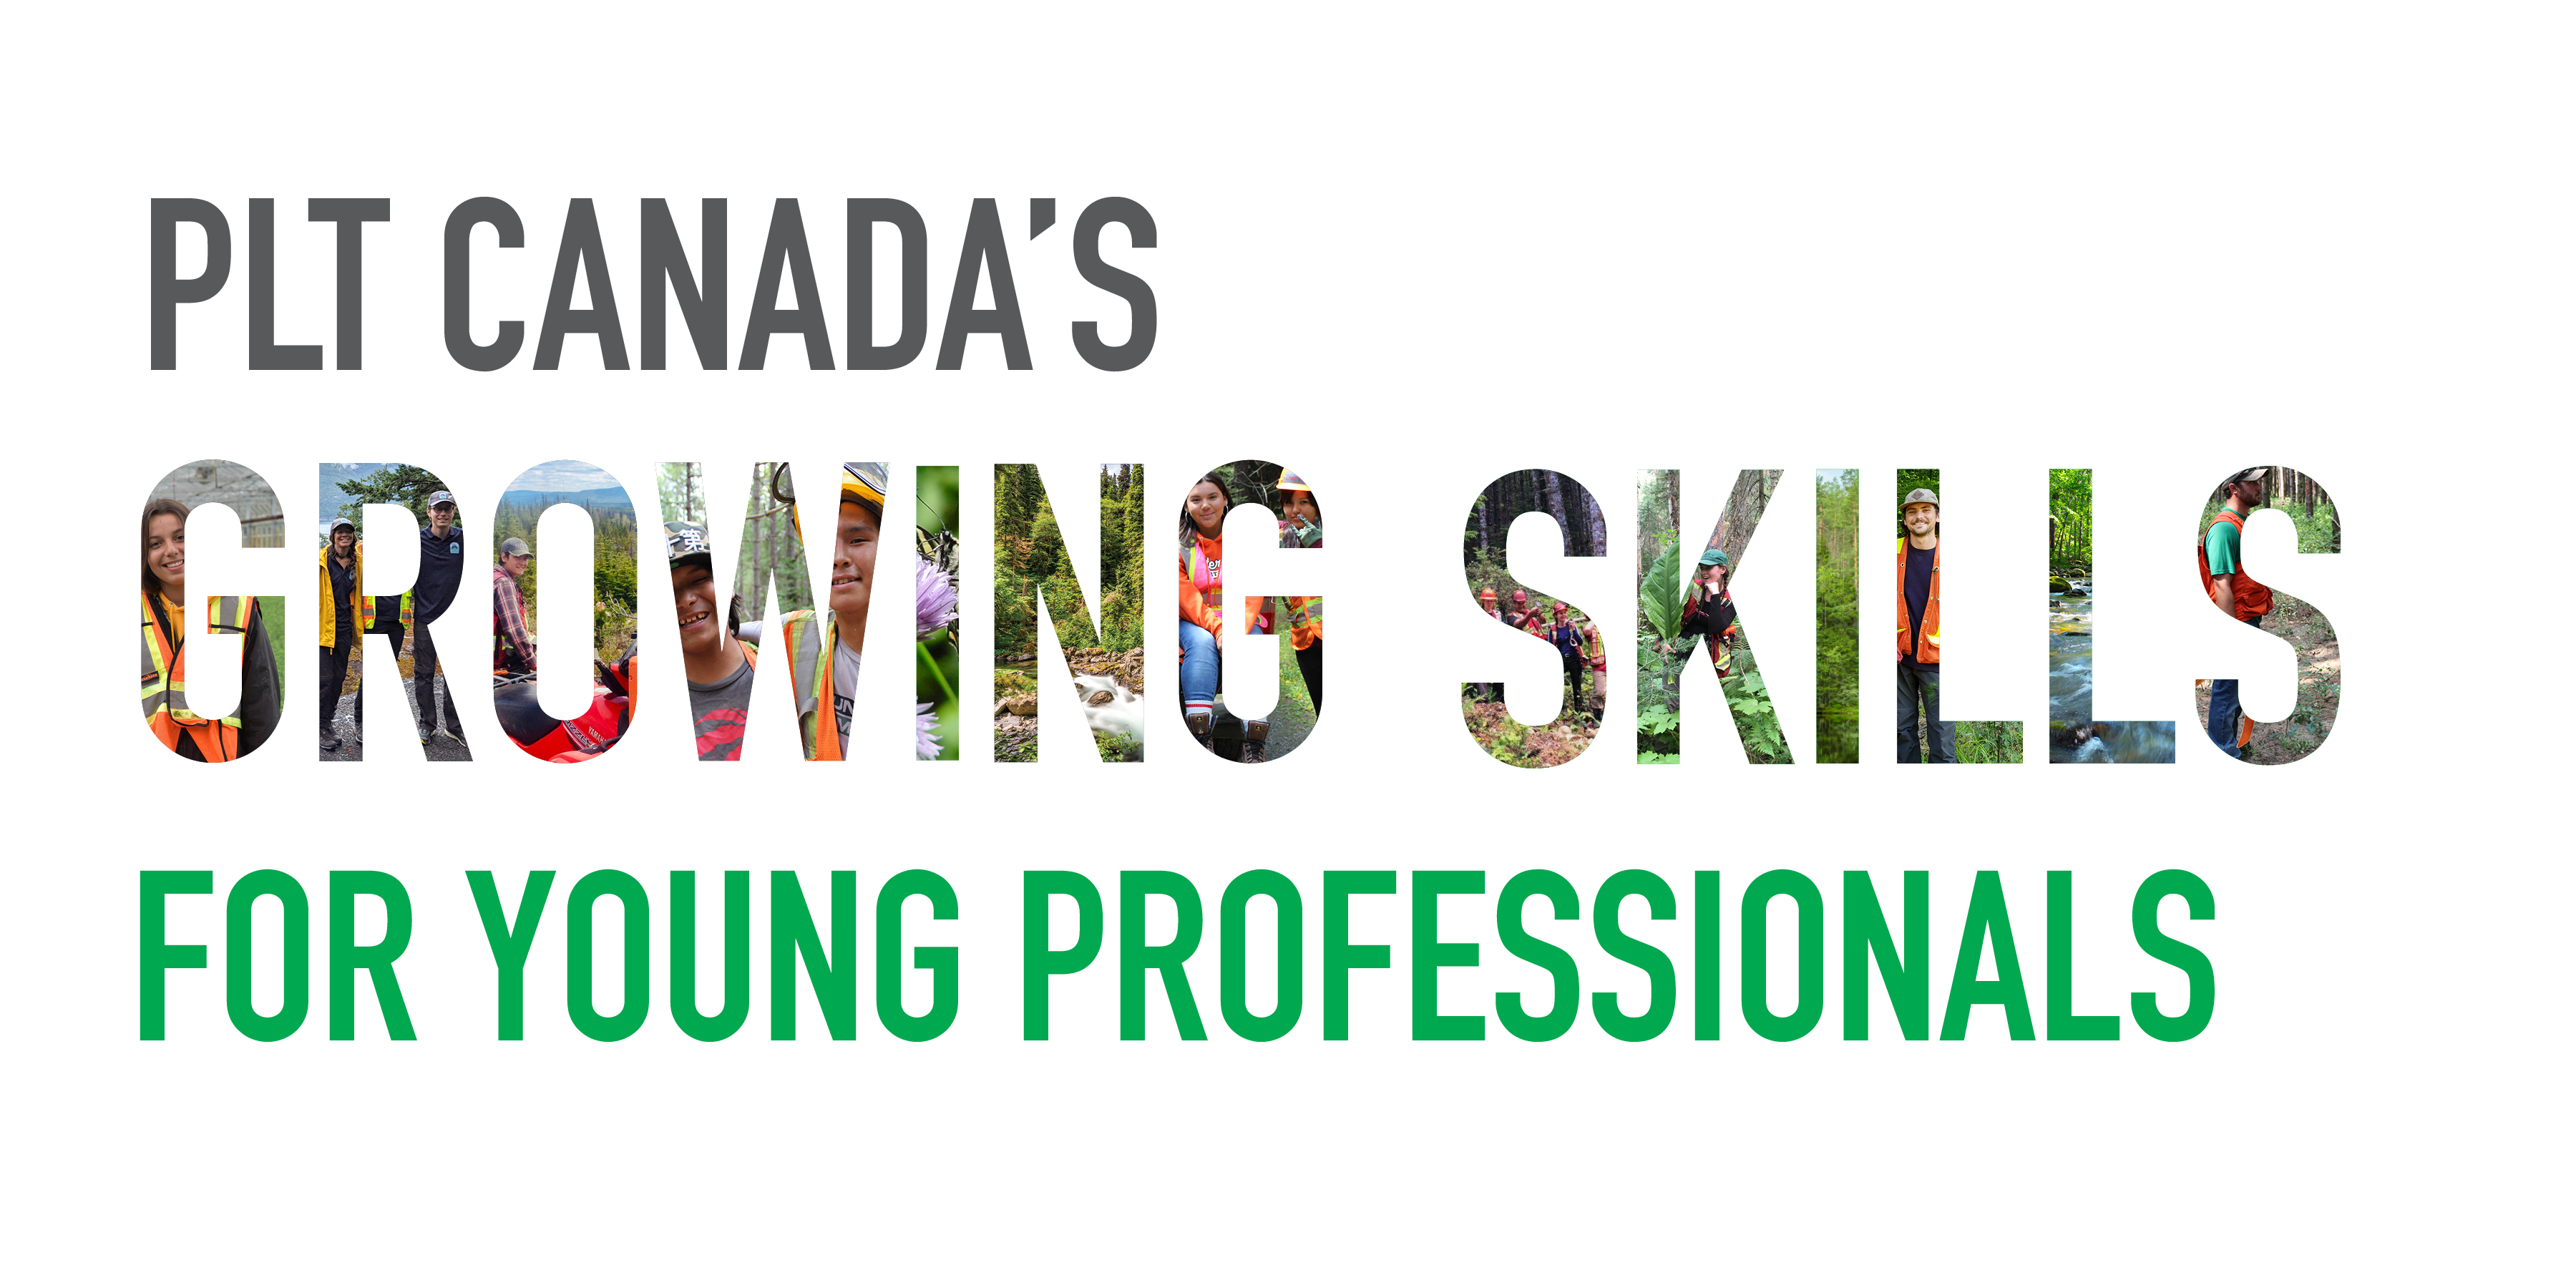 Growing skills for young professionals